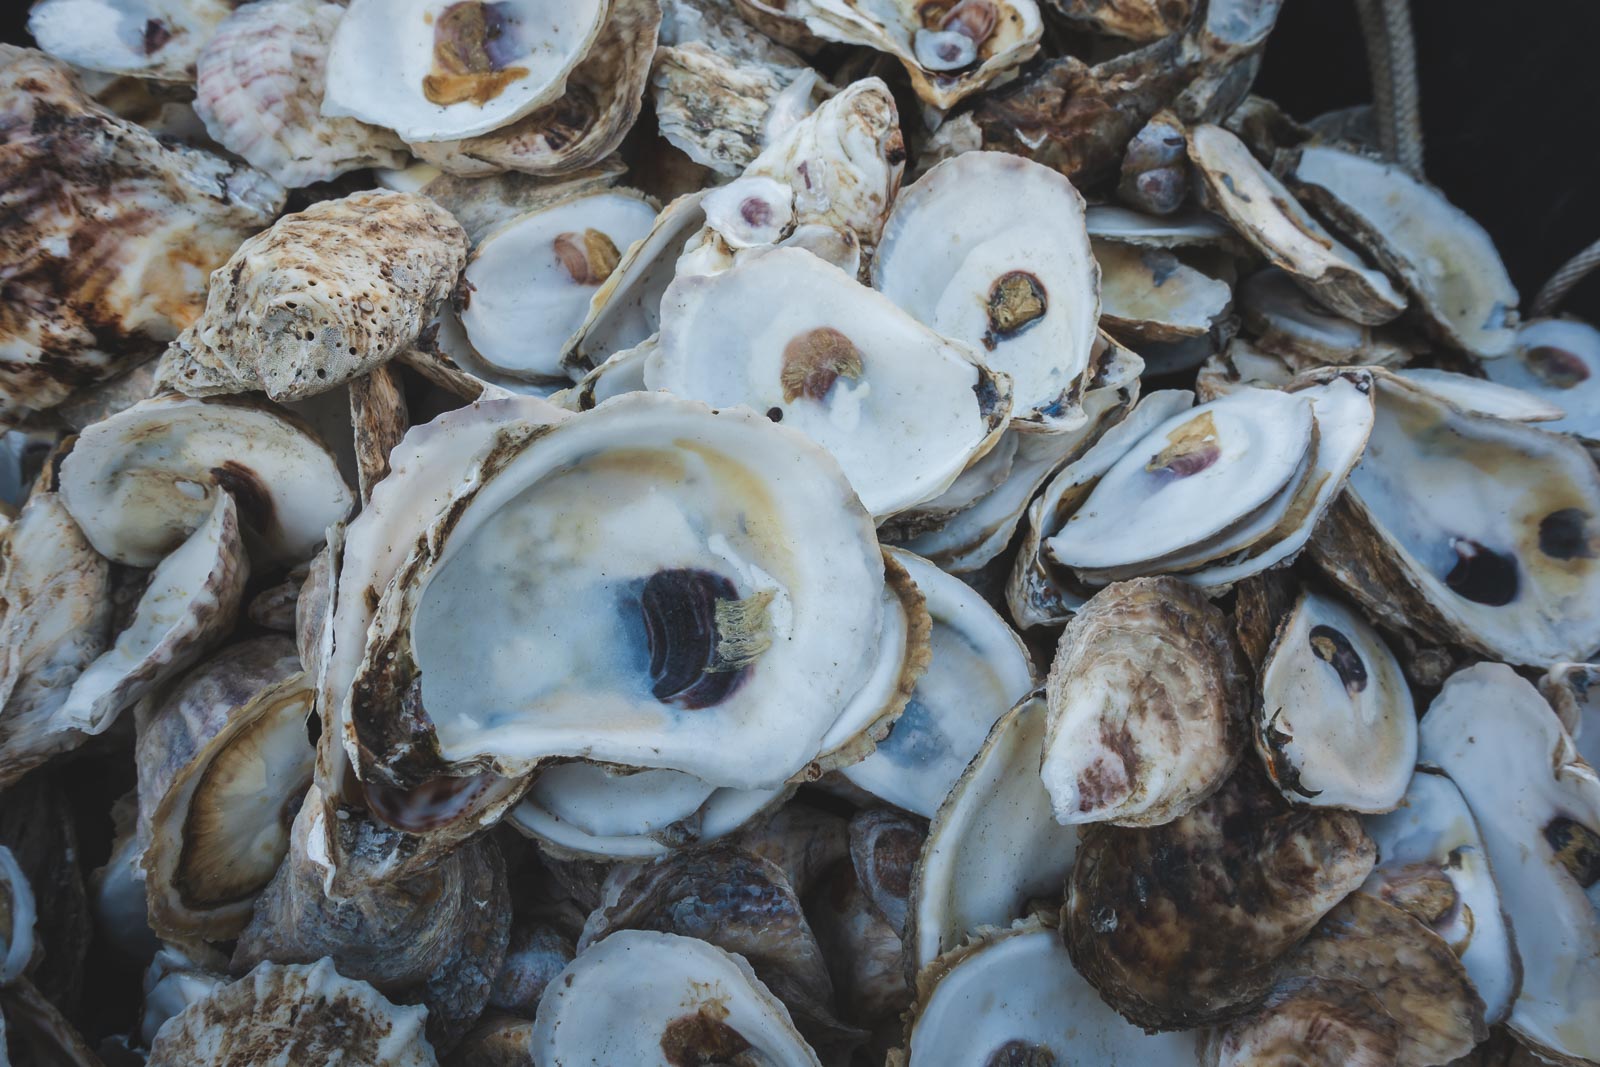 Facts about England Oysters